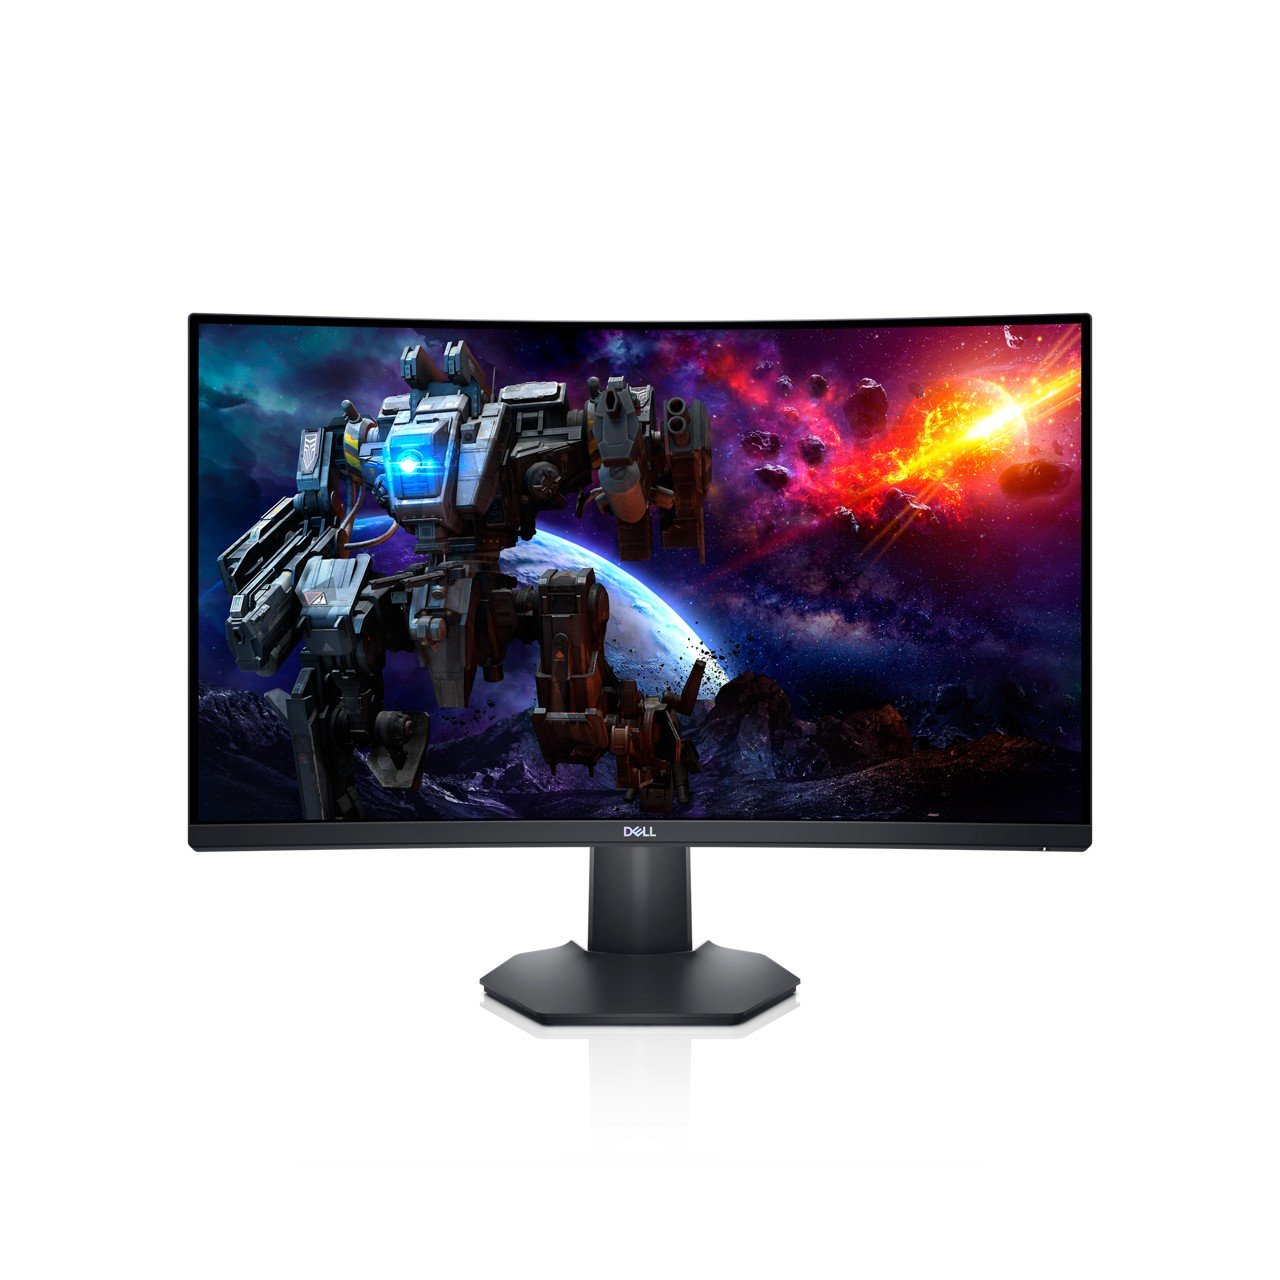 Dell S27 Monitor Front Shot